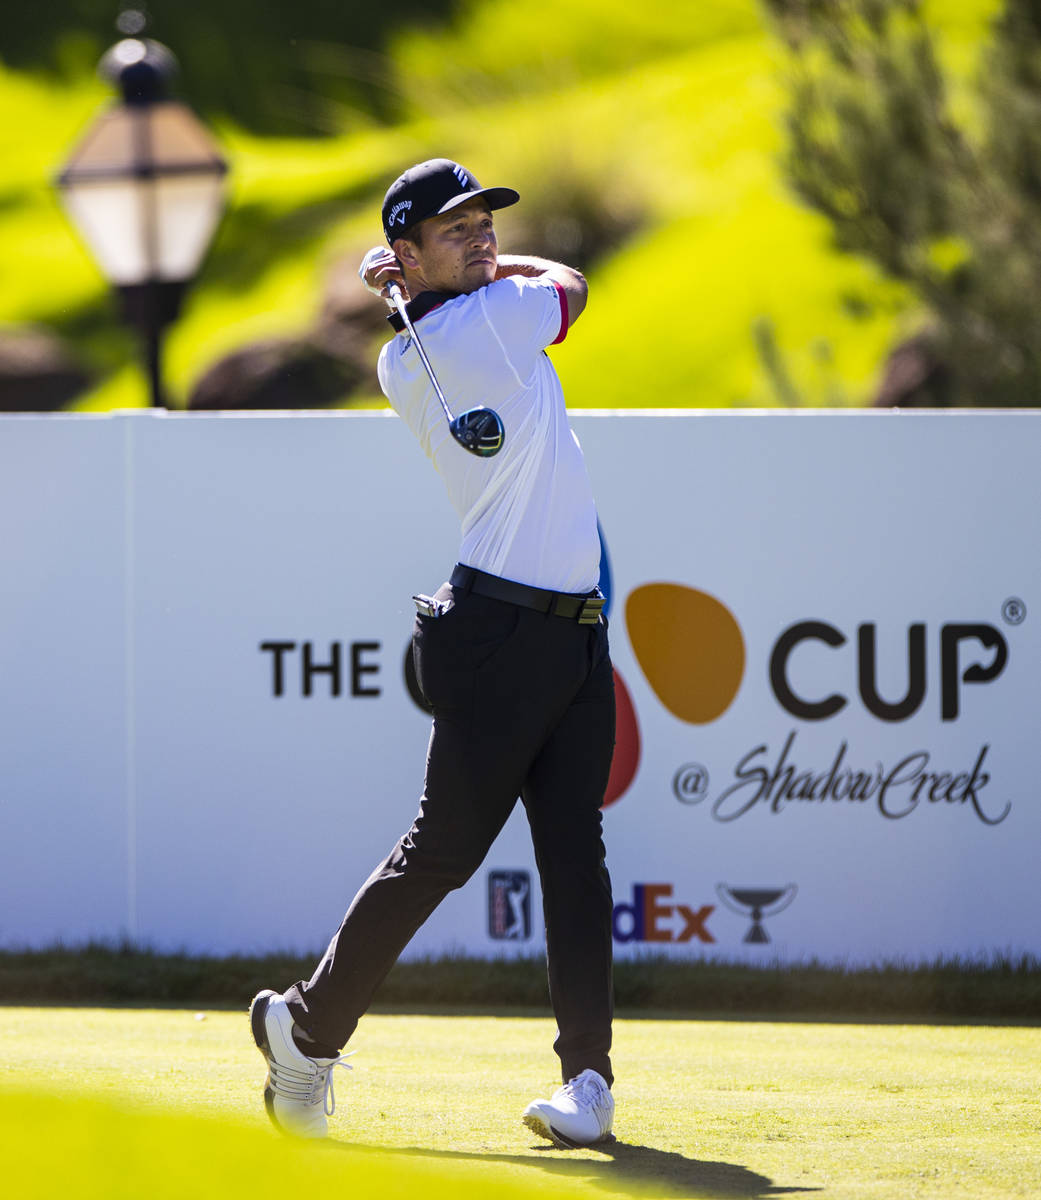 Xander Schauffele tees off at the first hole during the second round of the CJ Cup at the Shado ...